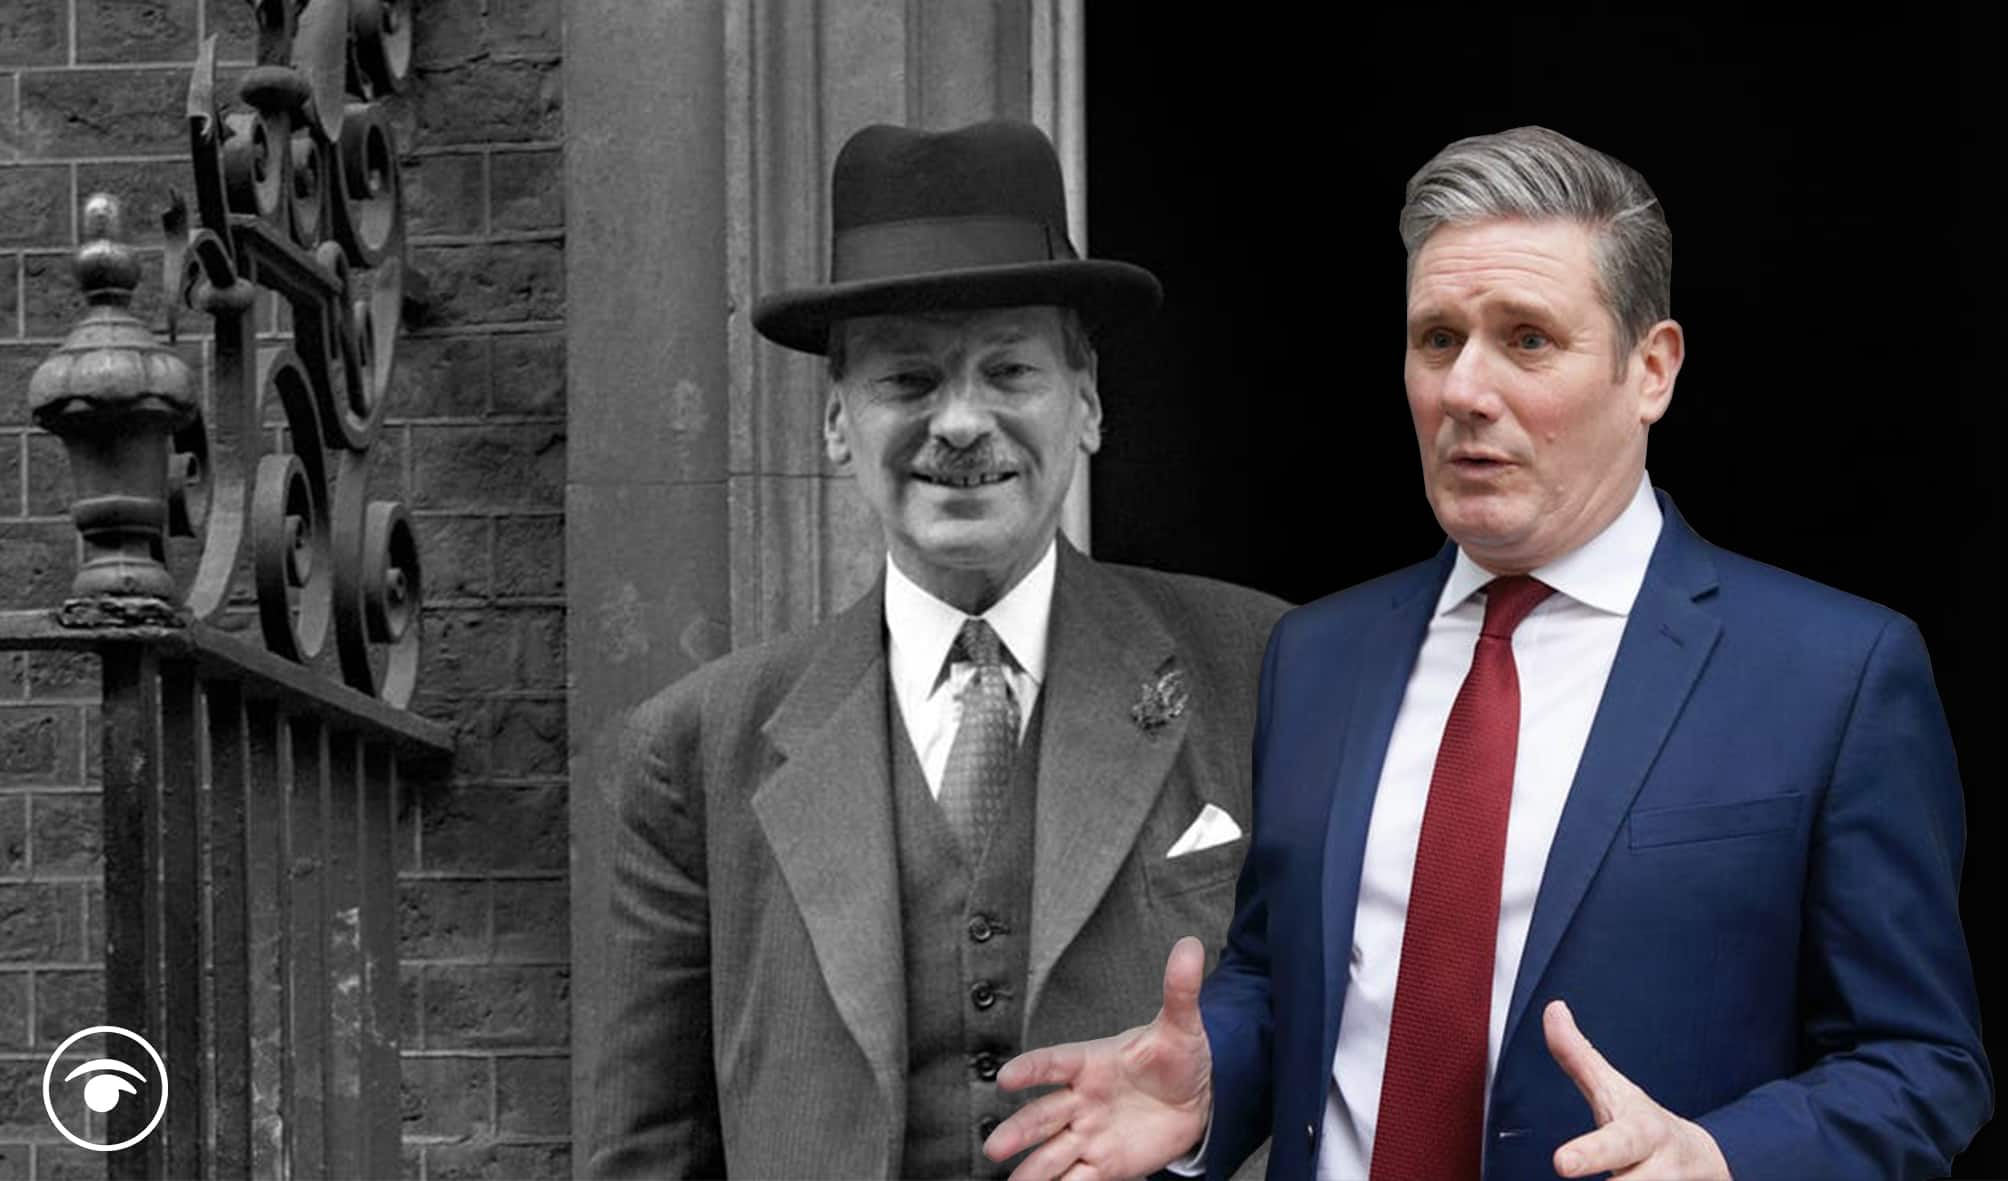 Starmer channels inner Attlee as he sets sights on post-WWII recovery